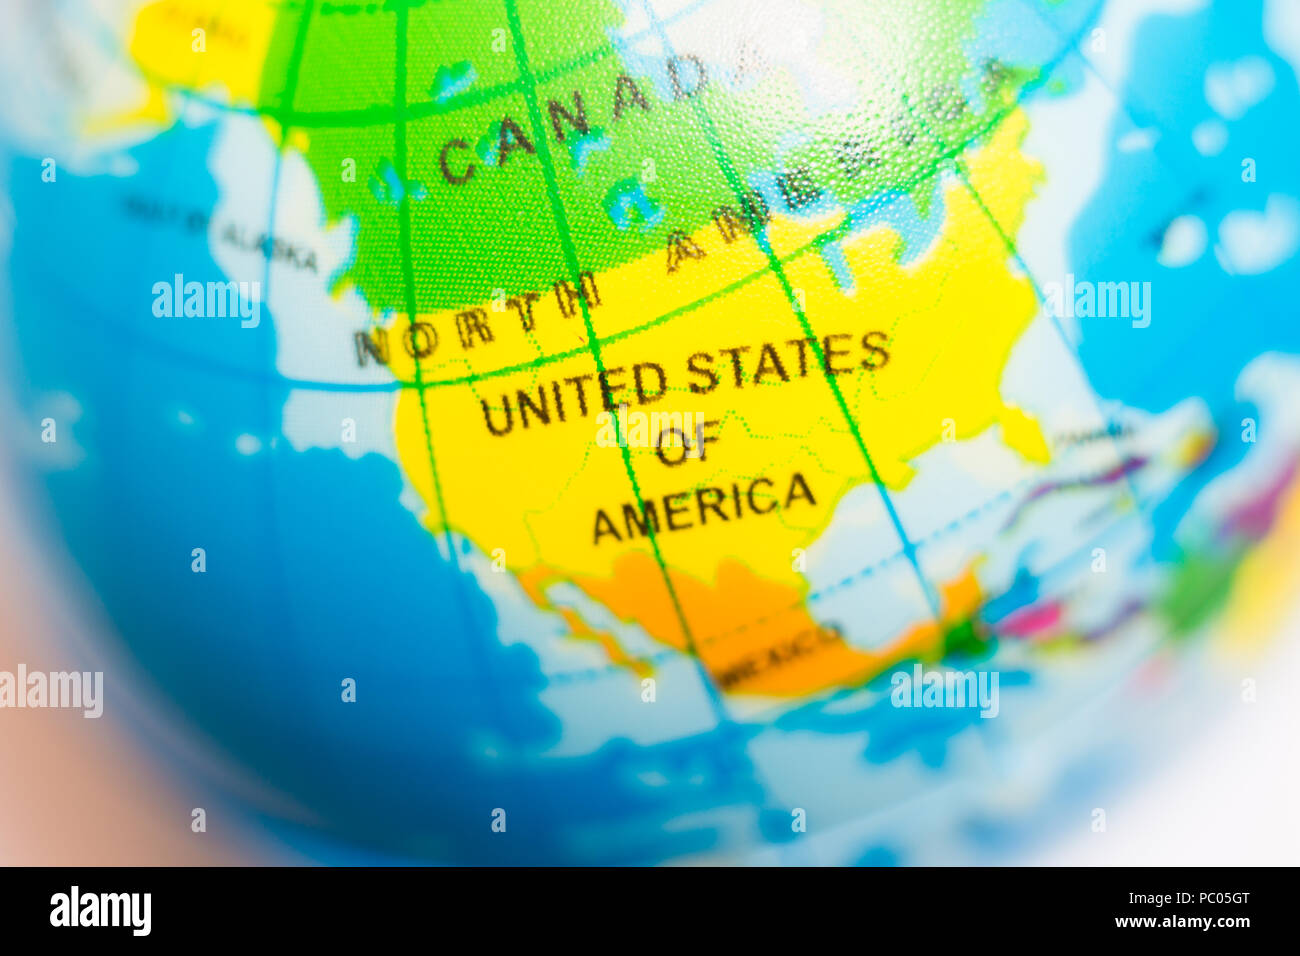 Child's globe showing United States of America or US, USA, concept Stock Photo